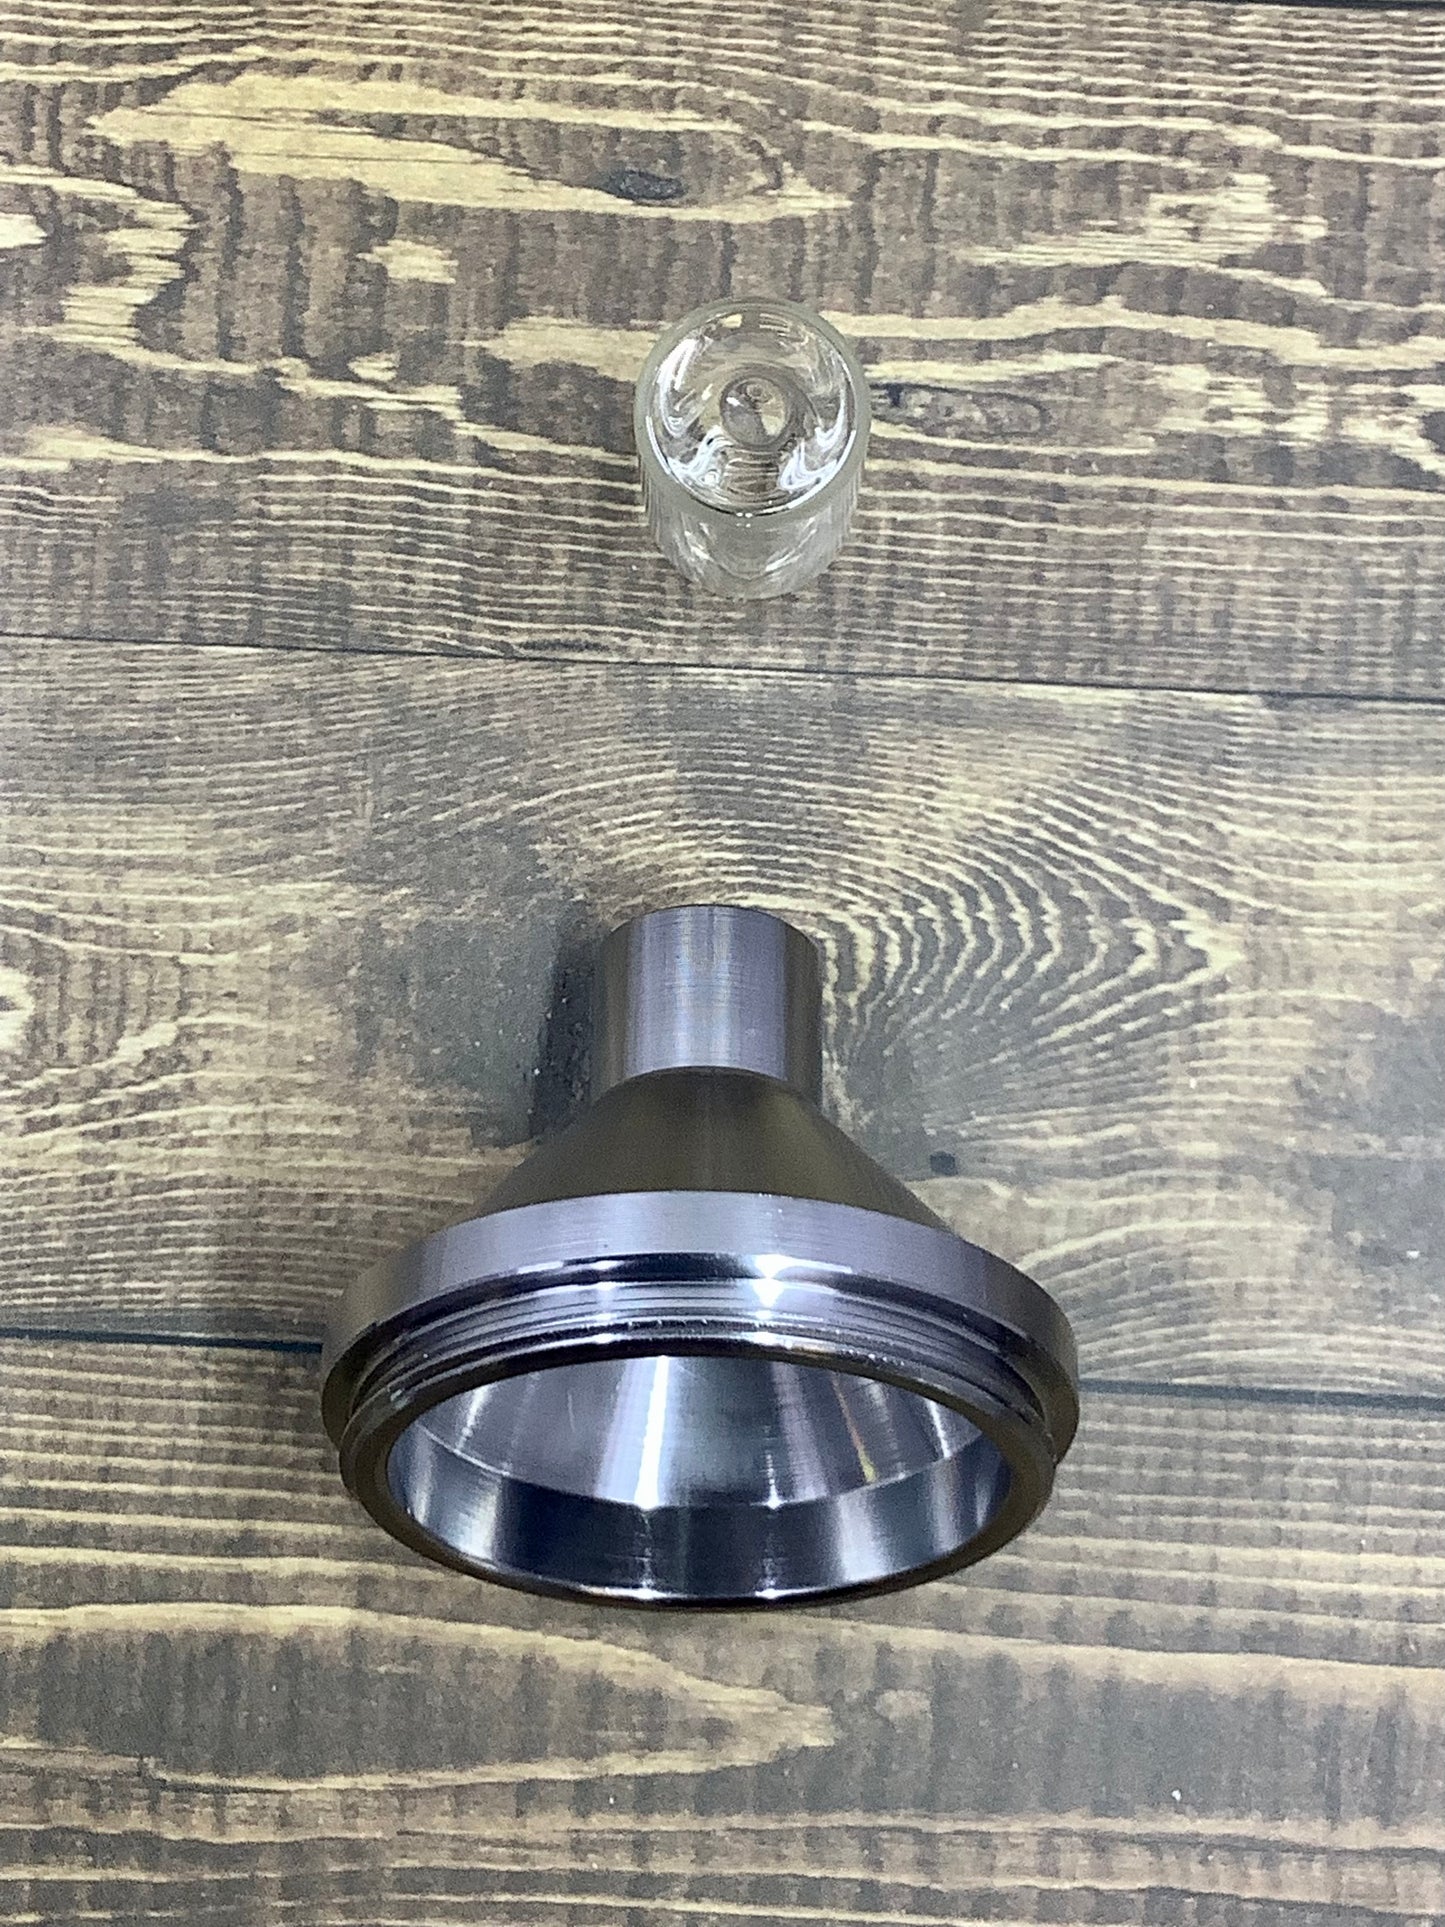 2 Inch Stainless Steel Kief Press W/ Crank Handle yoga smokes yoga studio, delivery, delivery near me, yoga smokes smoke shop, find smoke shop, head shop near me, yoga studio, headshop, head shop, local smoke shop, psl, psl smoke shop, smoke shop, smokeshop, yoga, yoga studio, dispensary, local dispensary, smokeshop near me, port saint lucie, florida, port st lucie, lounge, life, highlife, love, stoned, highsociety. Yoga Smokes